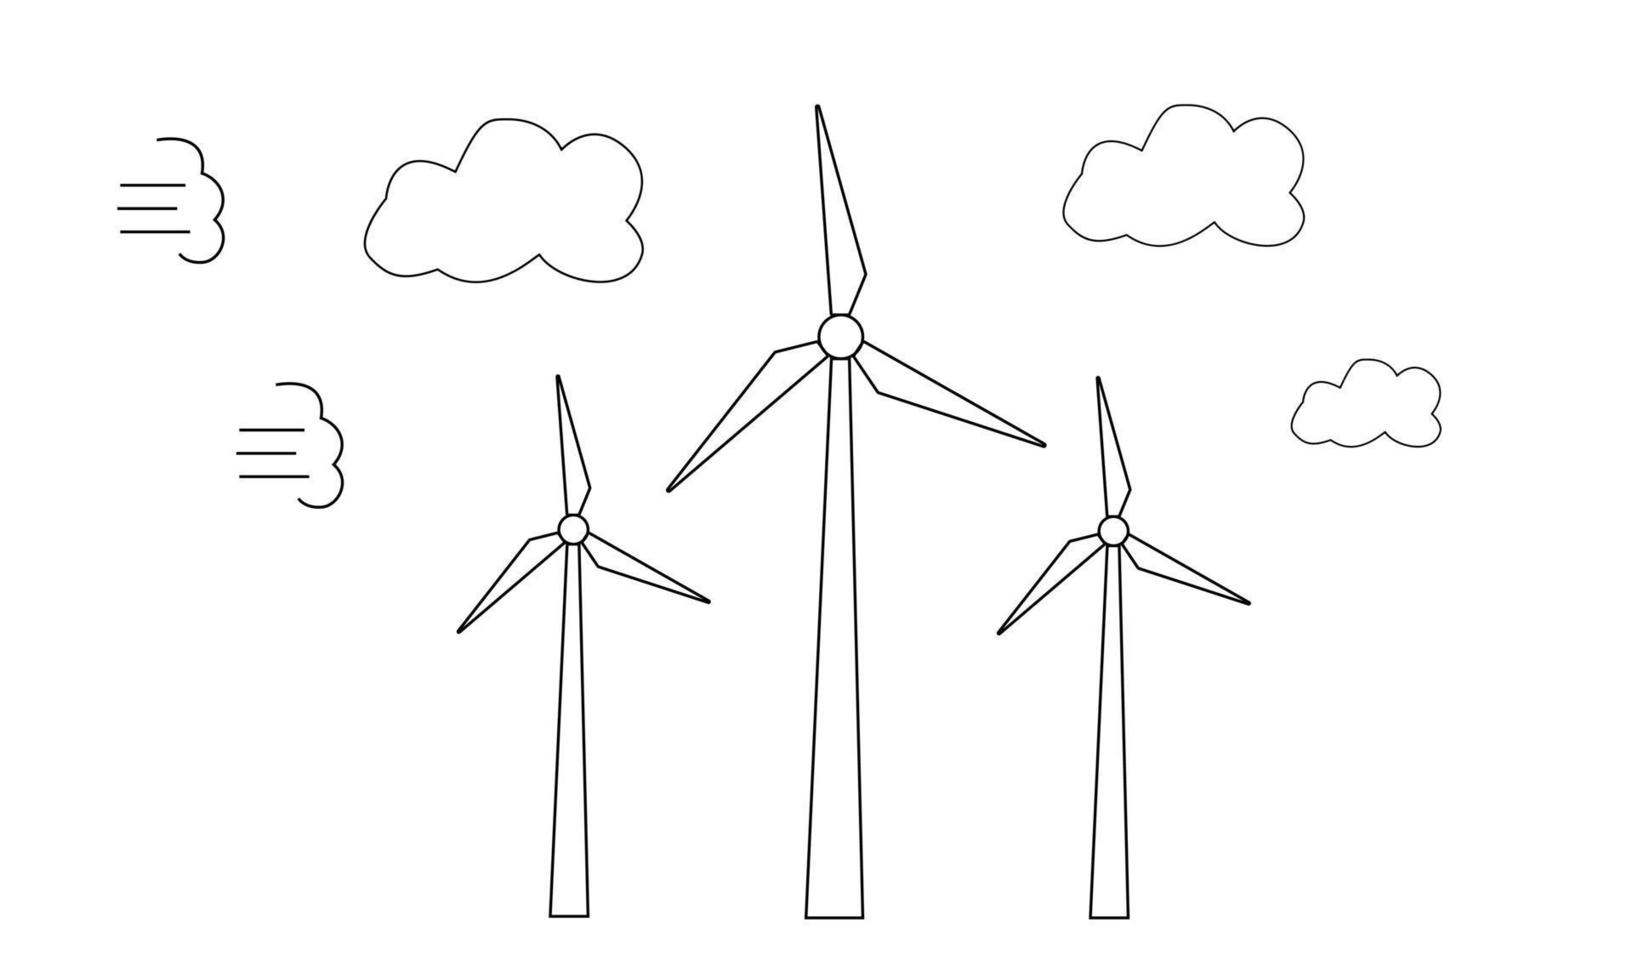 Hand drawn wind farms driven by the flow of air. Use of renewable energy. Taking care of the environment. Doodle scetch style. Vector illustration